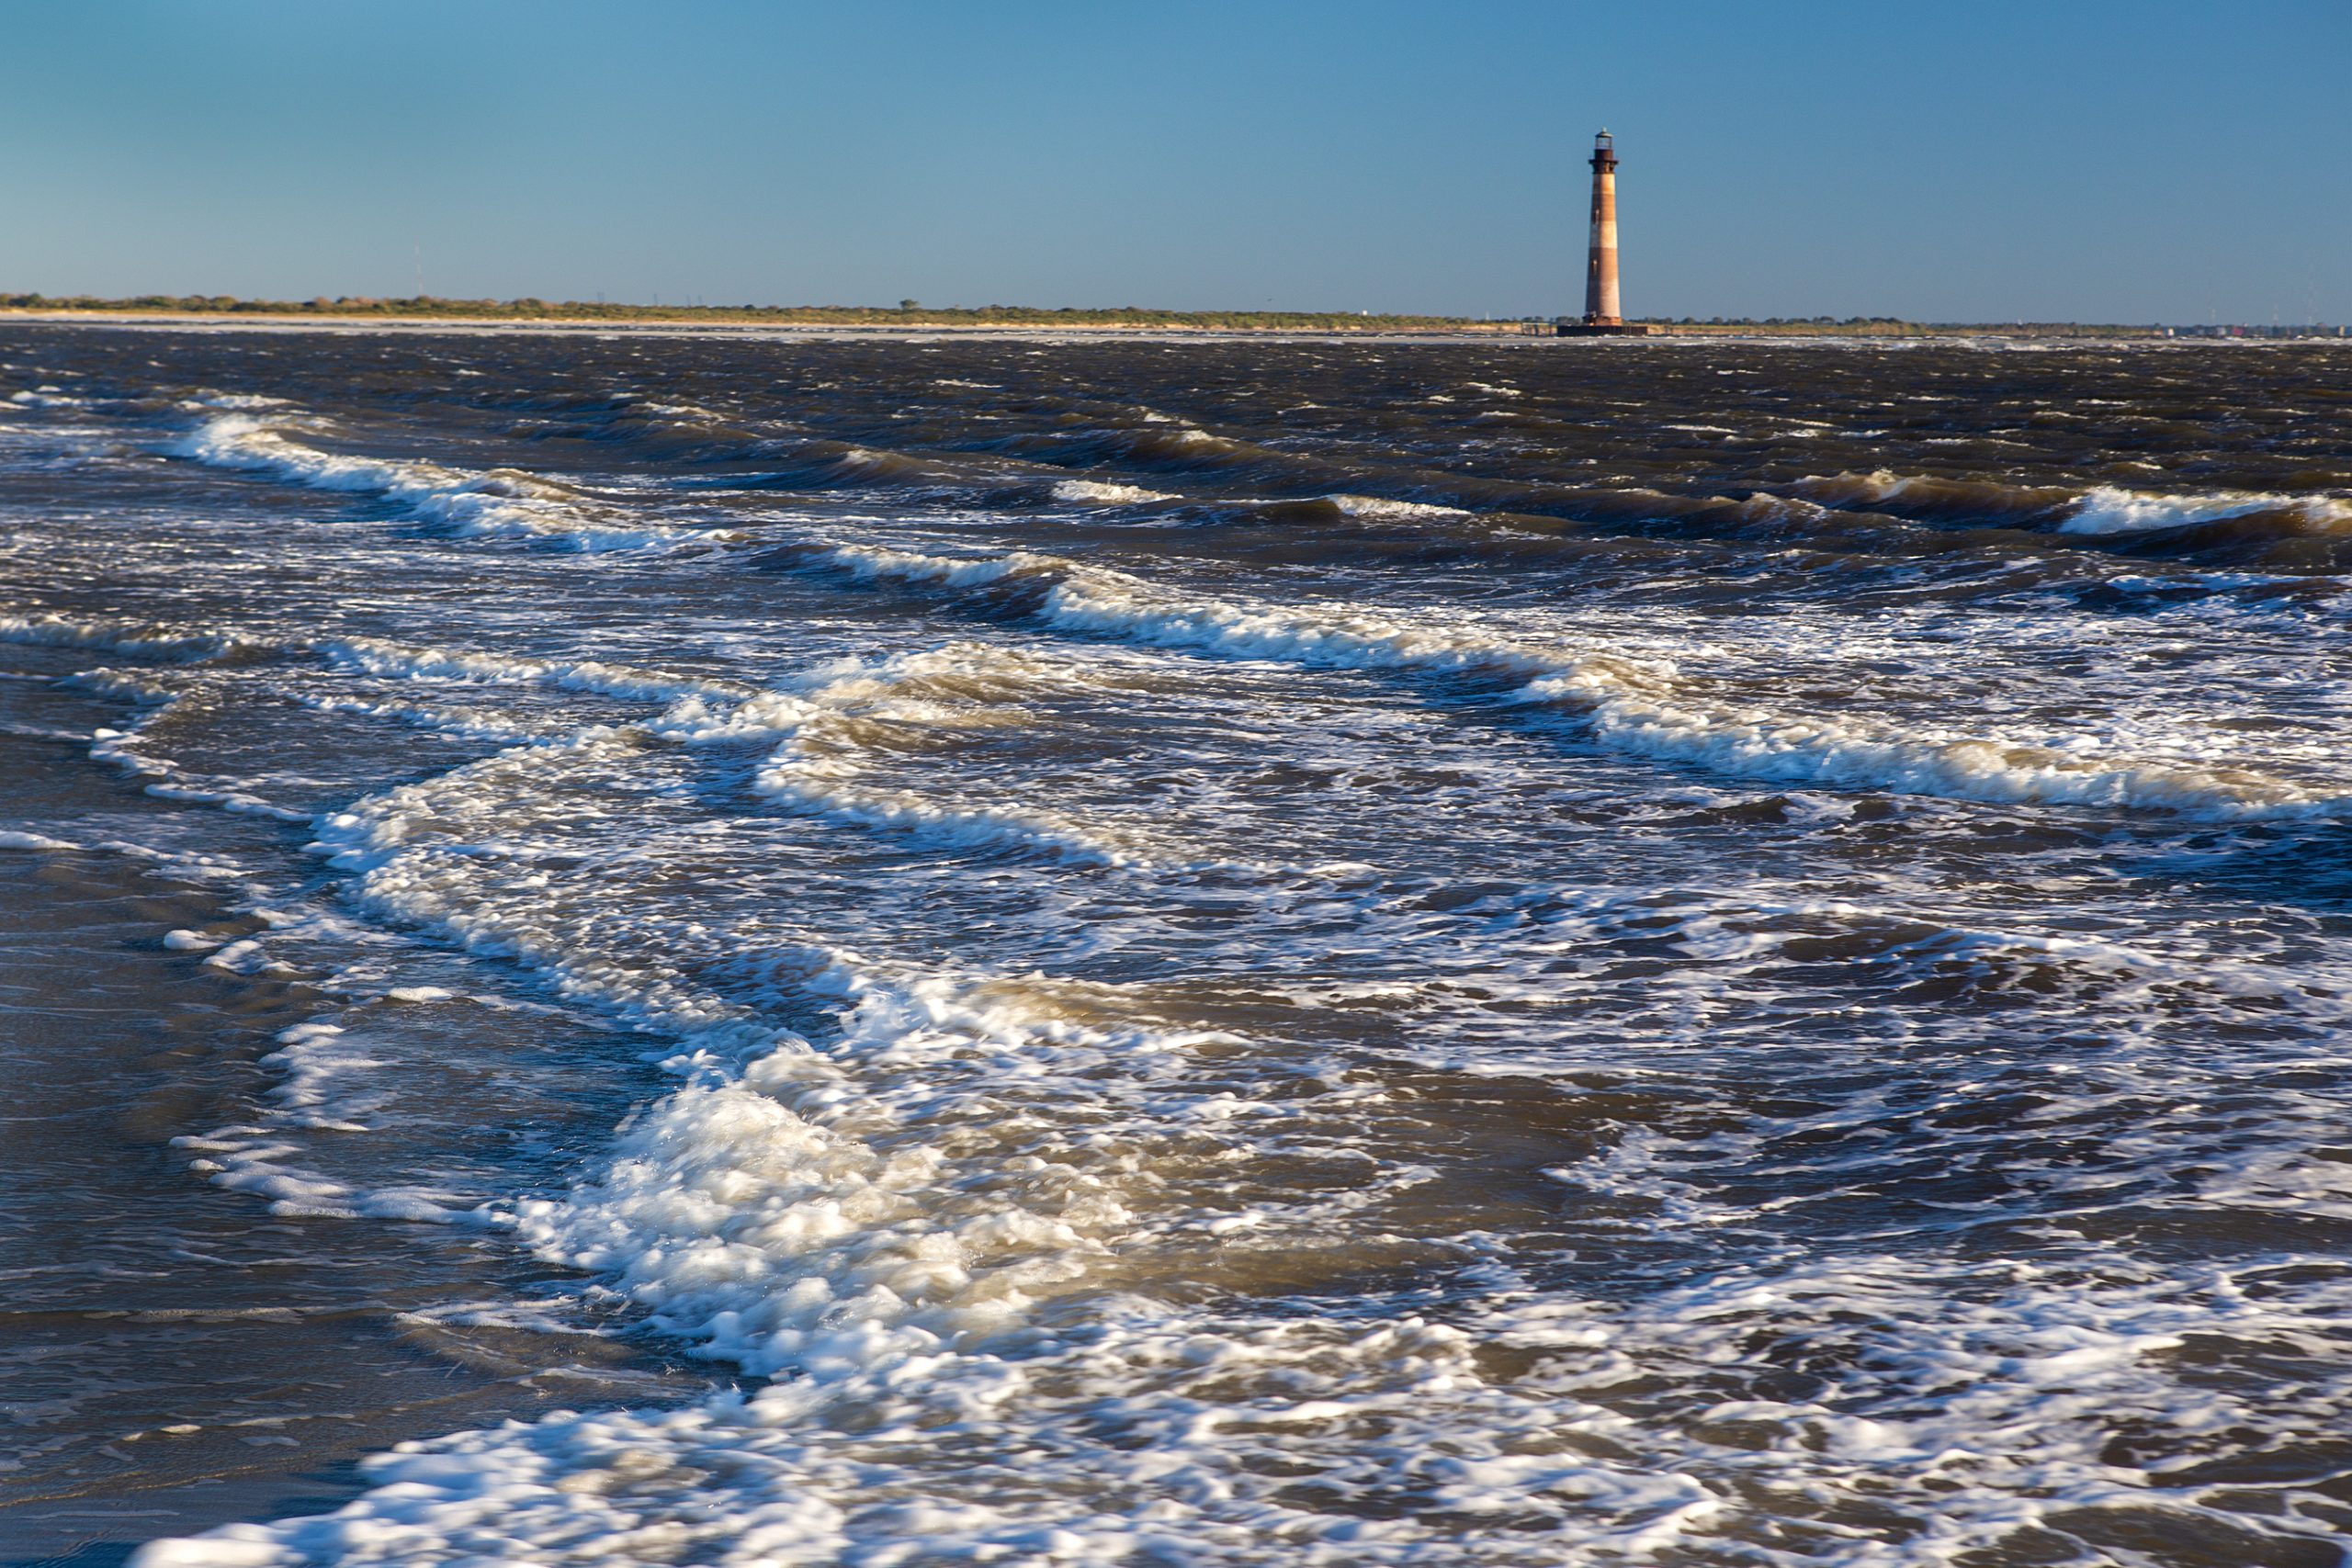 On the north end of Folly, the Morris Island Lighthouse stands alone on Morris Island. Opened in 1876, the structure survived countless storms throughout the centuries. Standing at 161 feet tall, the Morris Island Lighthouse is South Carolina’s tallest lighthouse.
